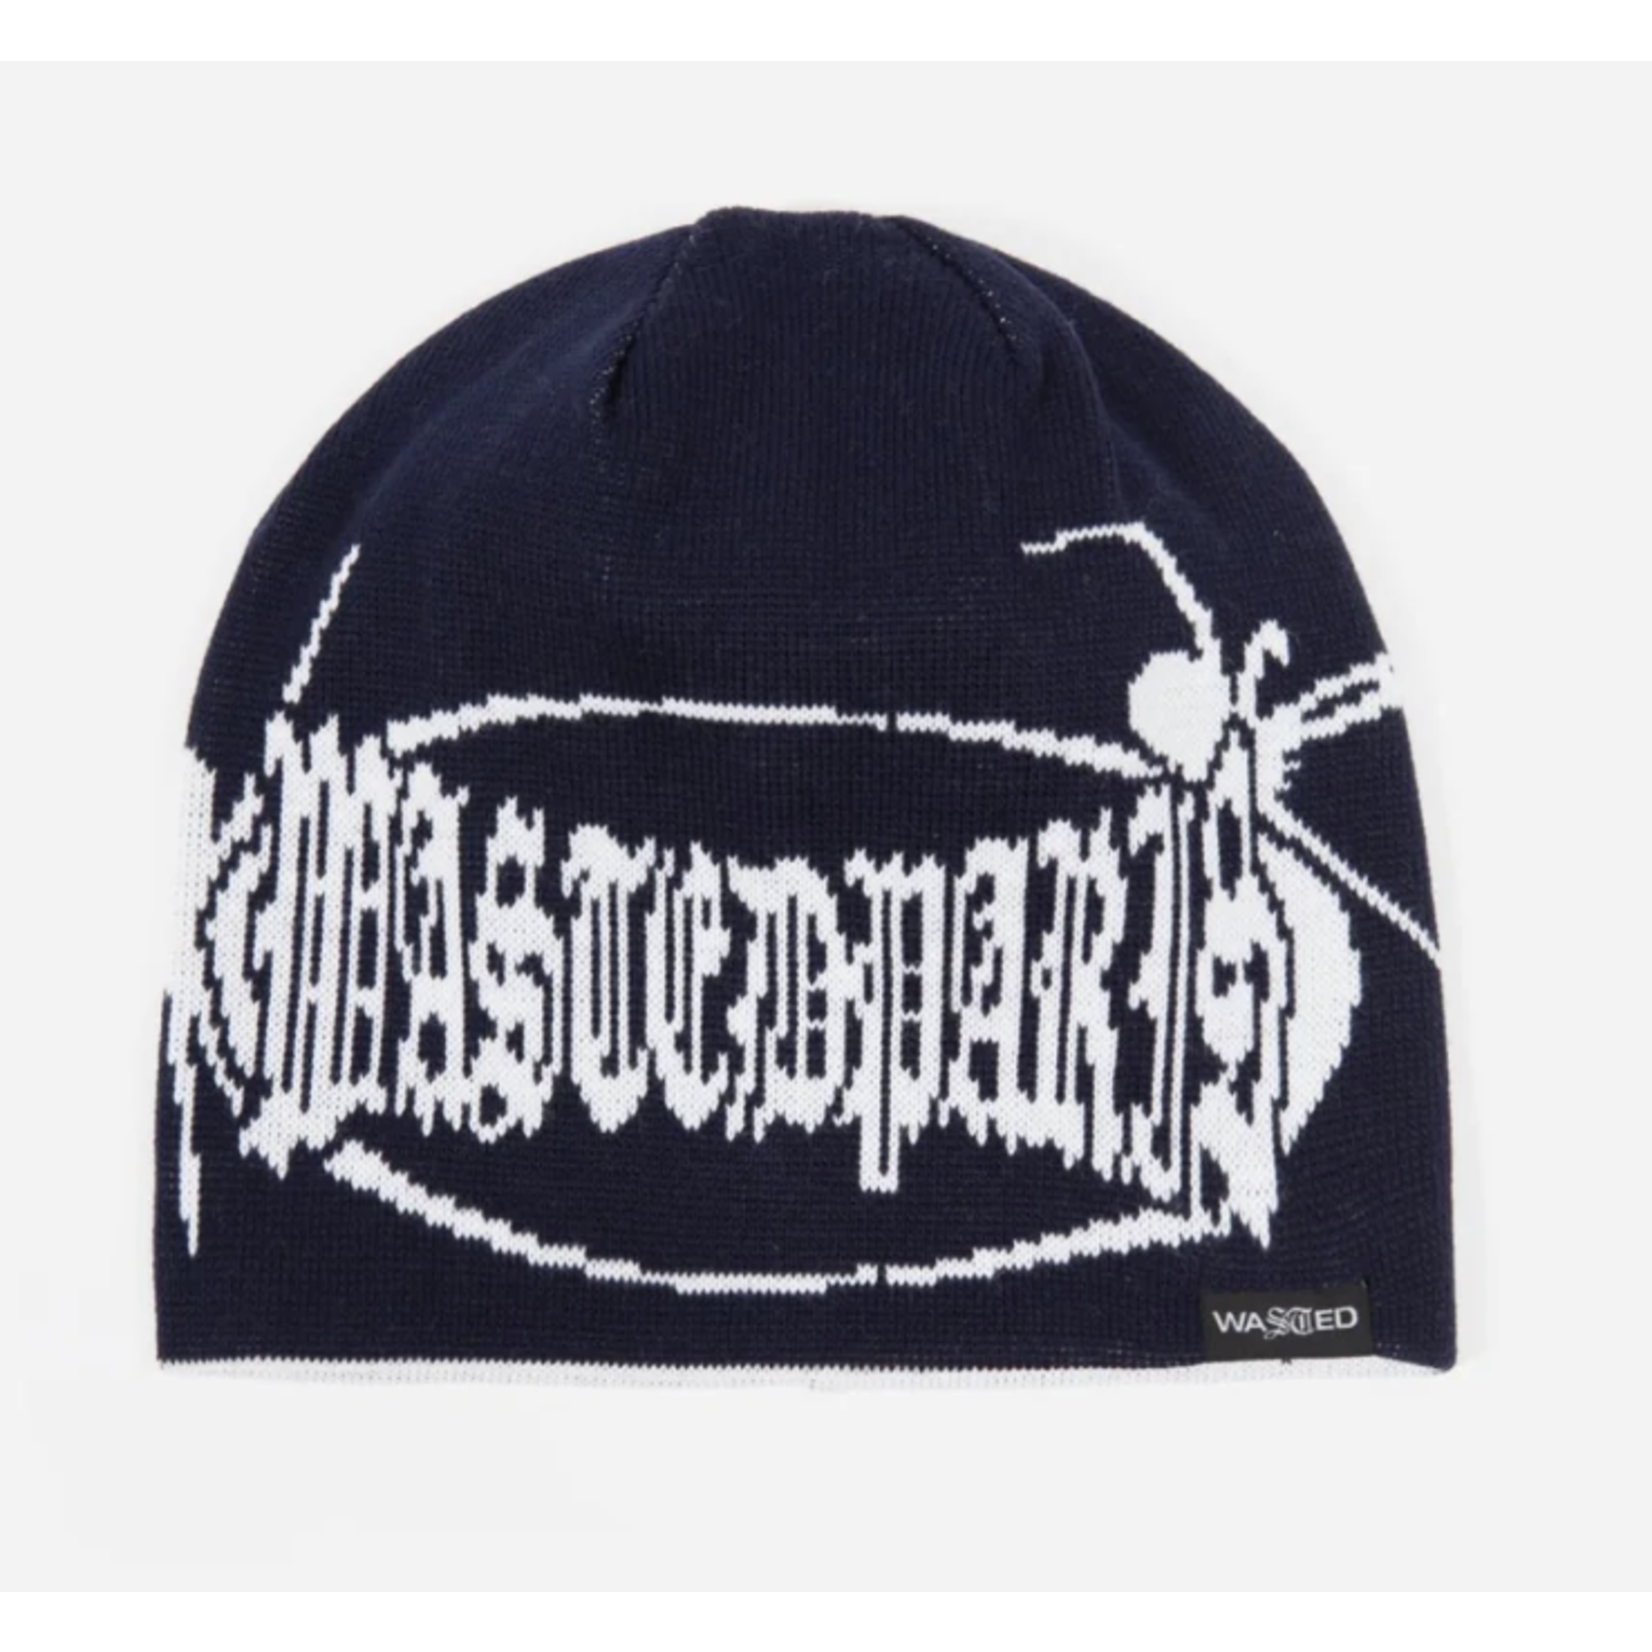 WASTED PARIS WASTED PARIS BROW BEANIE REVERSE BOILER